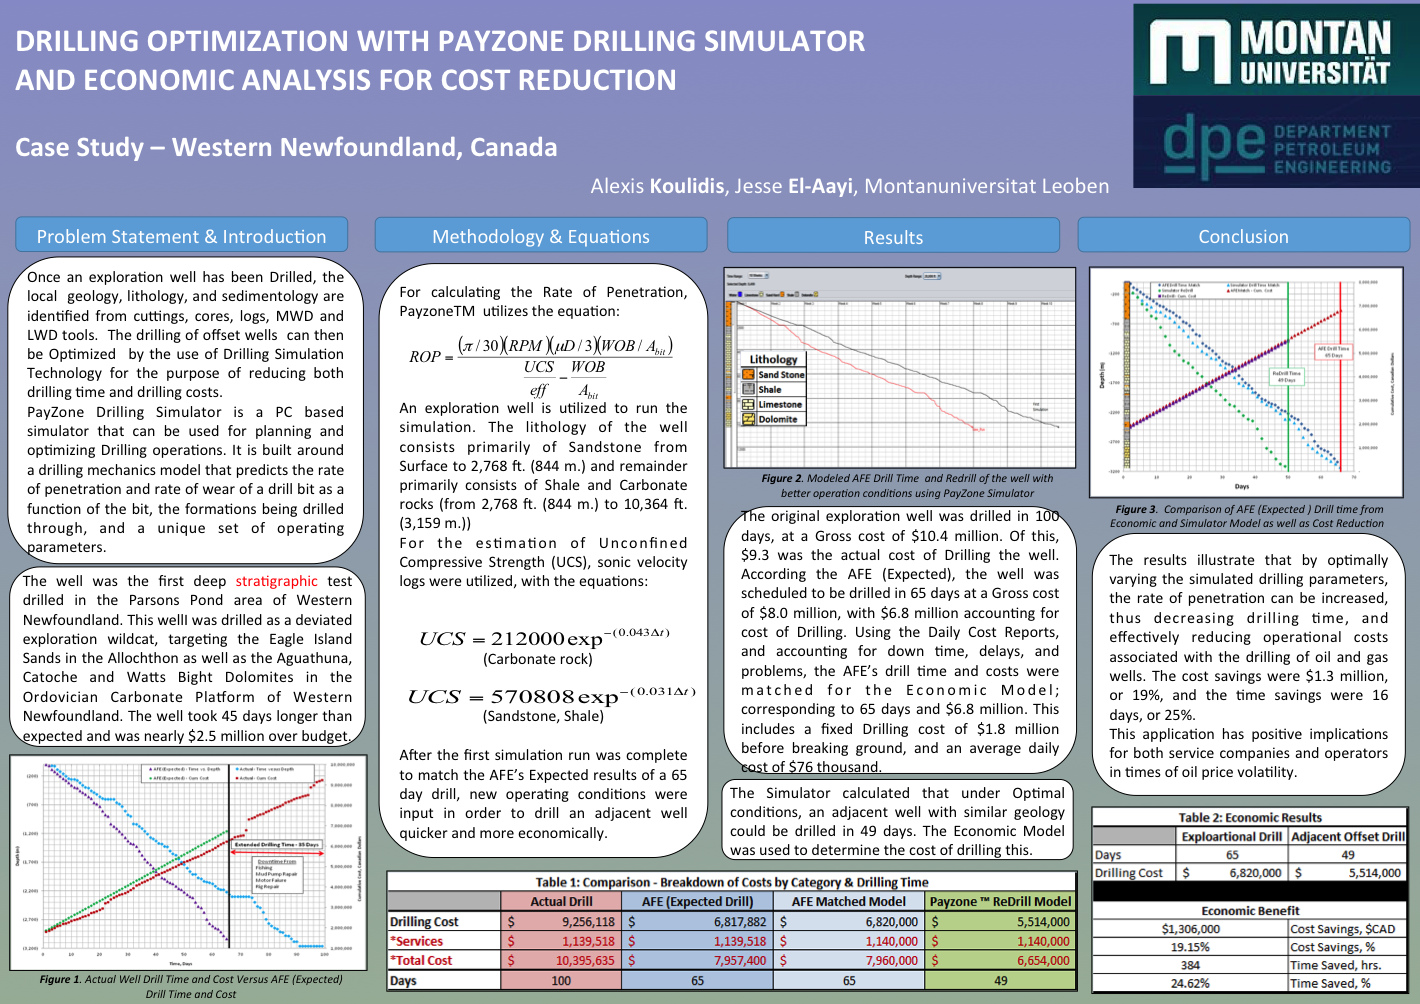 Drilling Optimization with Payzone Drilling Simulator and Economic Analysis for Cost Reduction